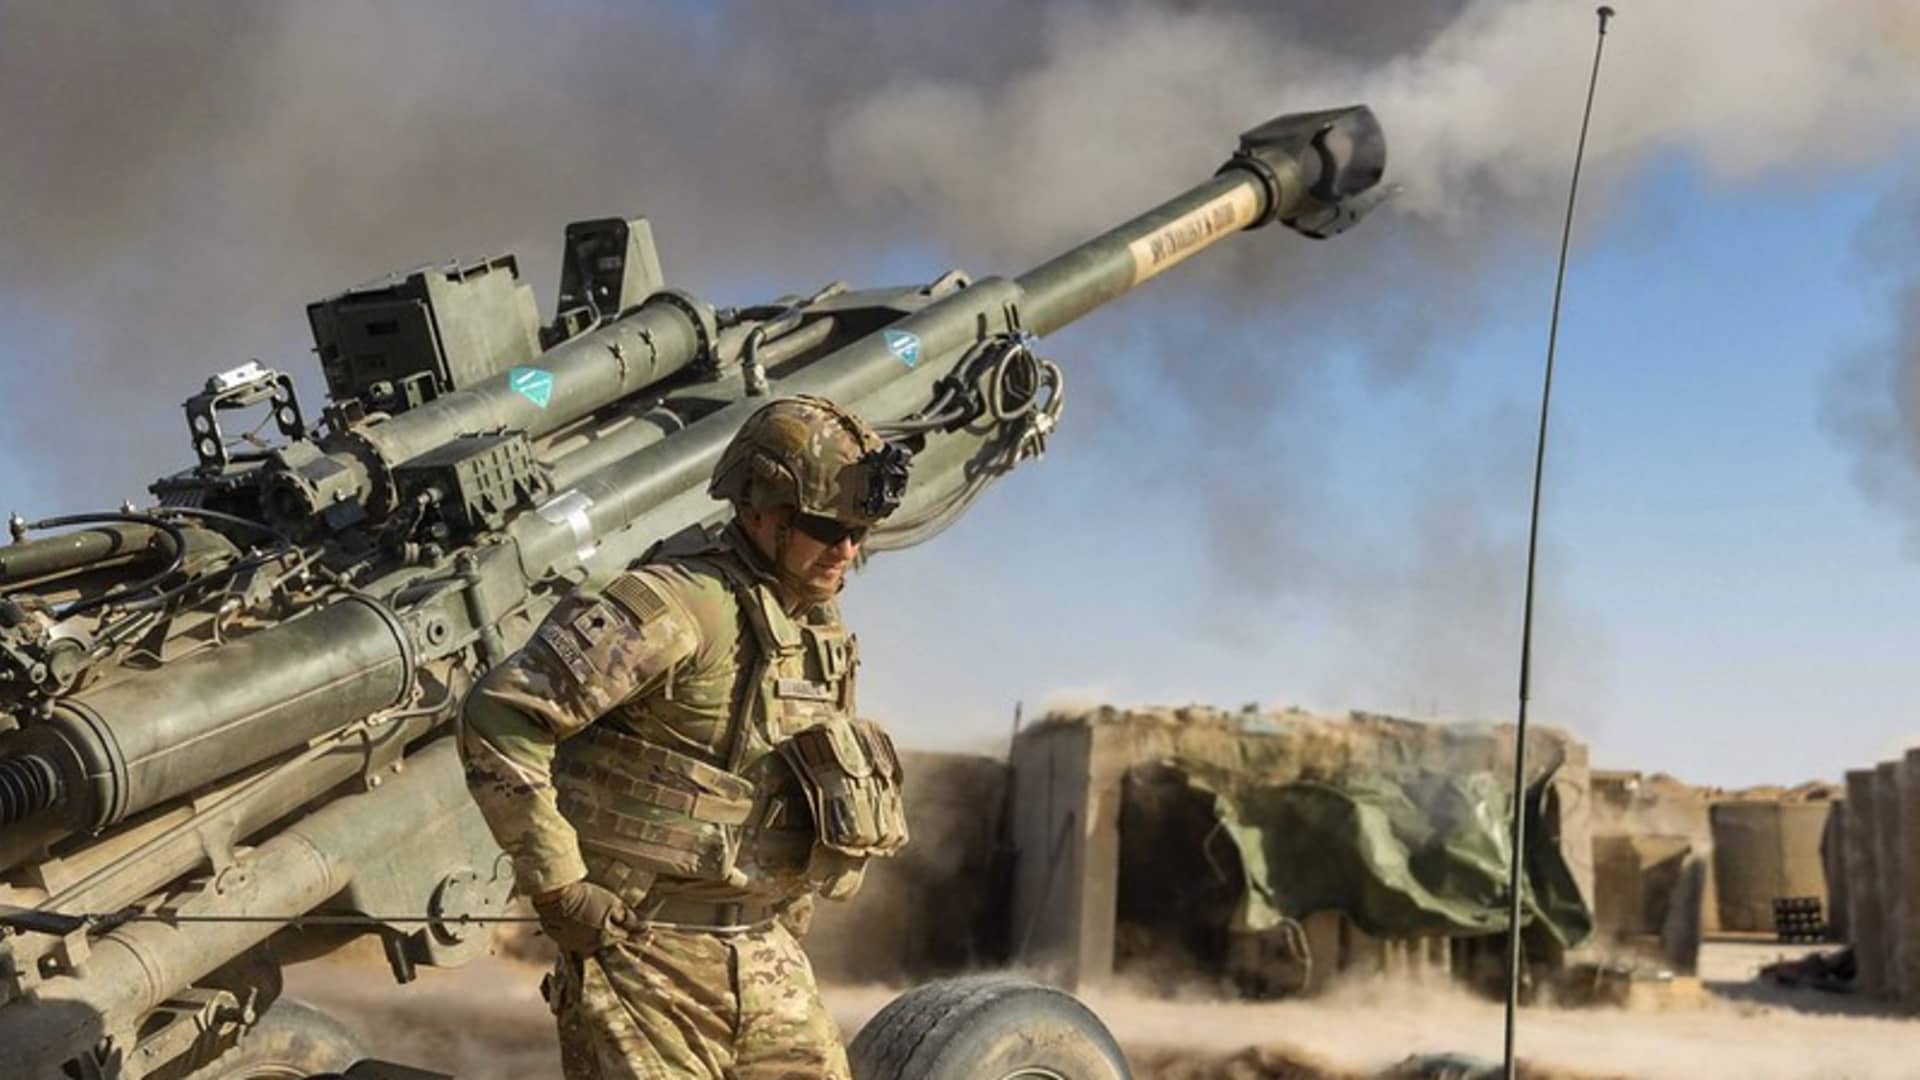 A Soldier conducts registration and calibration for the M777A2 howitzer weapon system in Syria, Sept. 30, 2021.